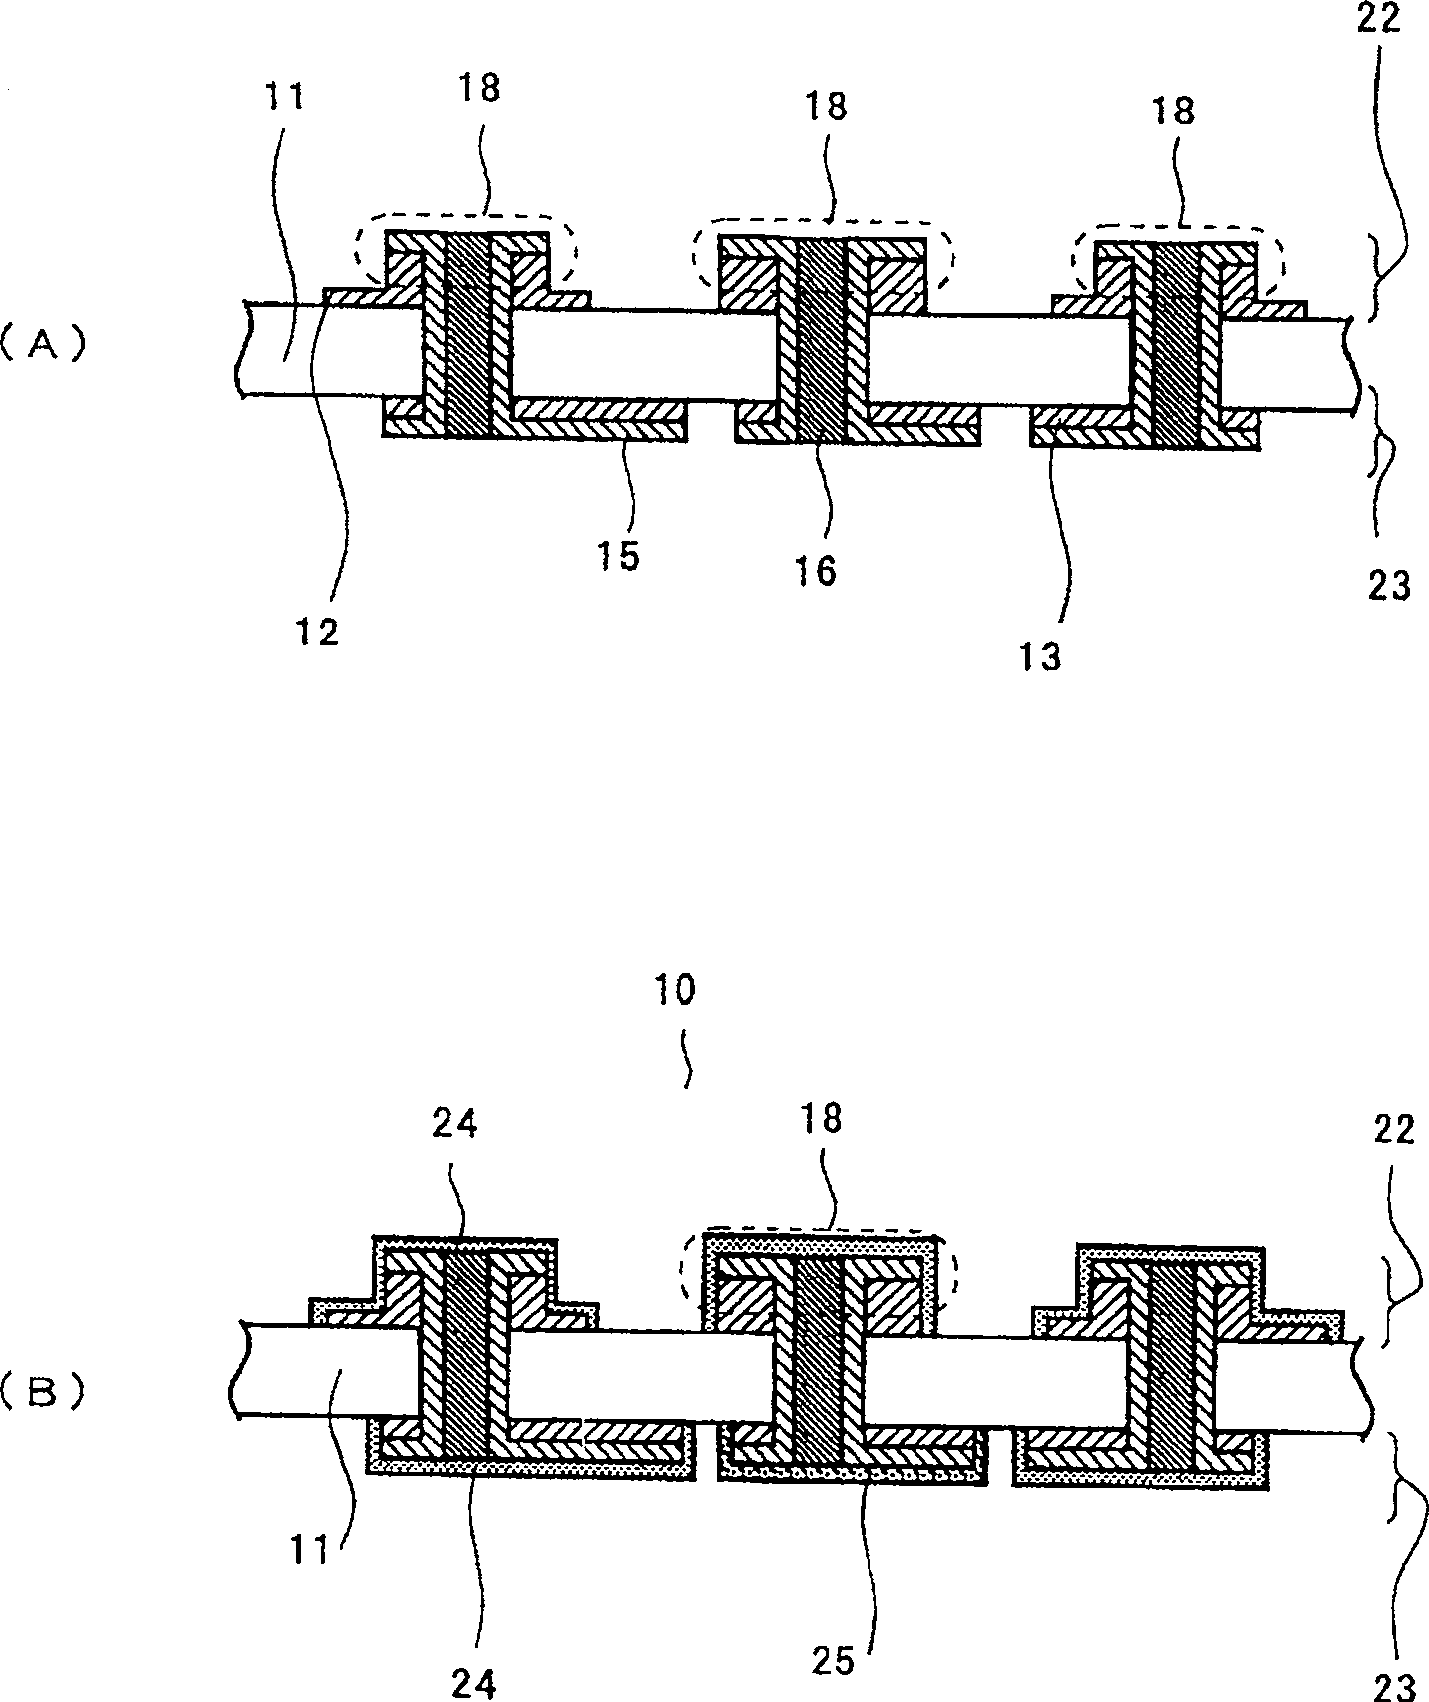 Method for manufacturing substrate with emergent points